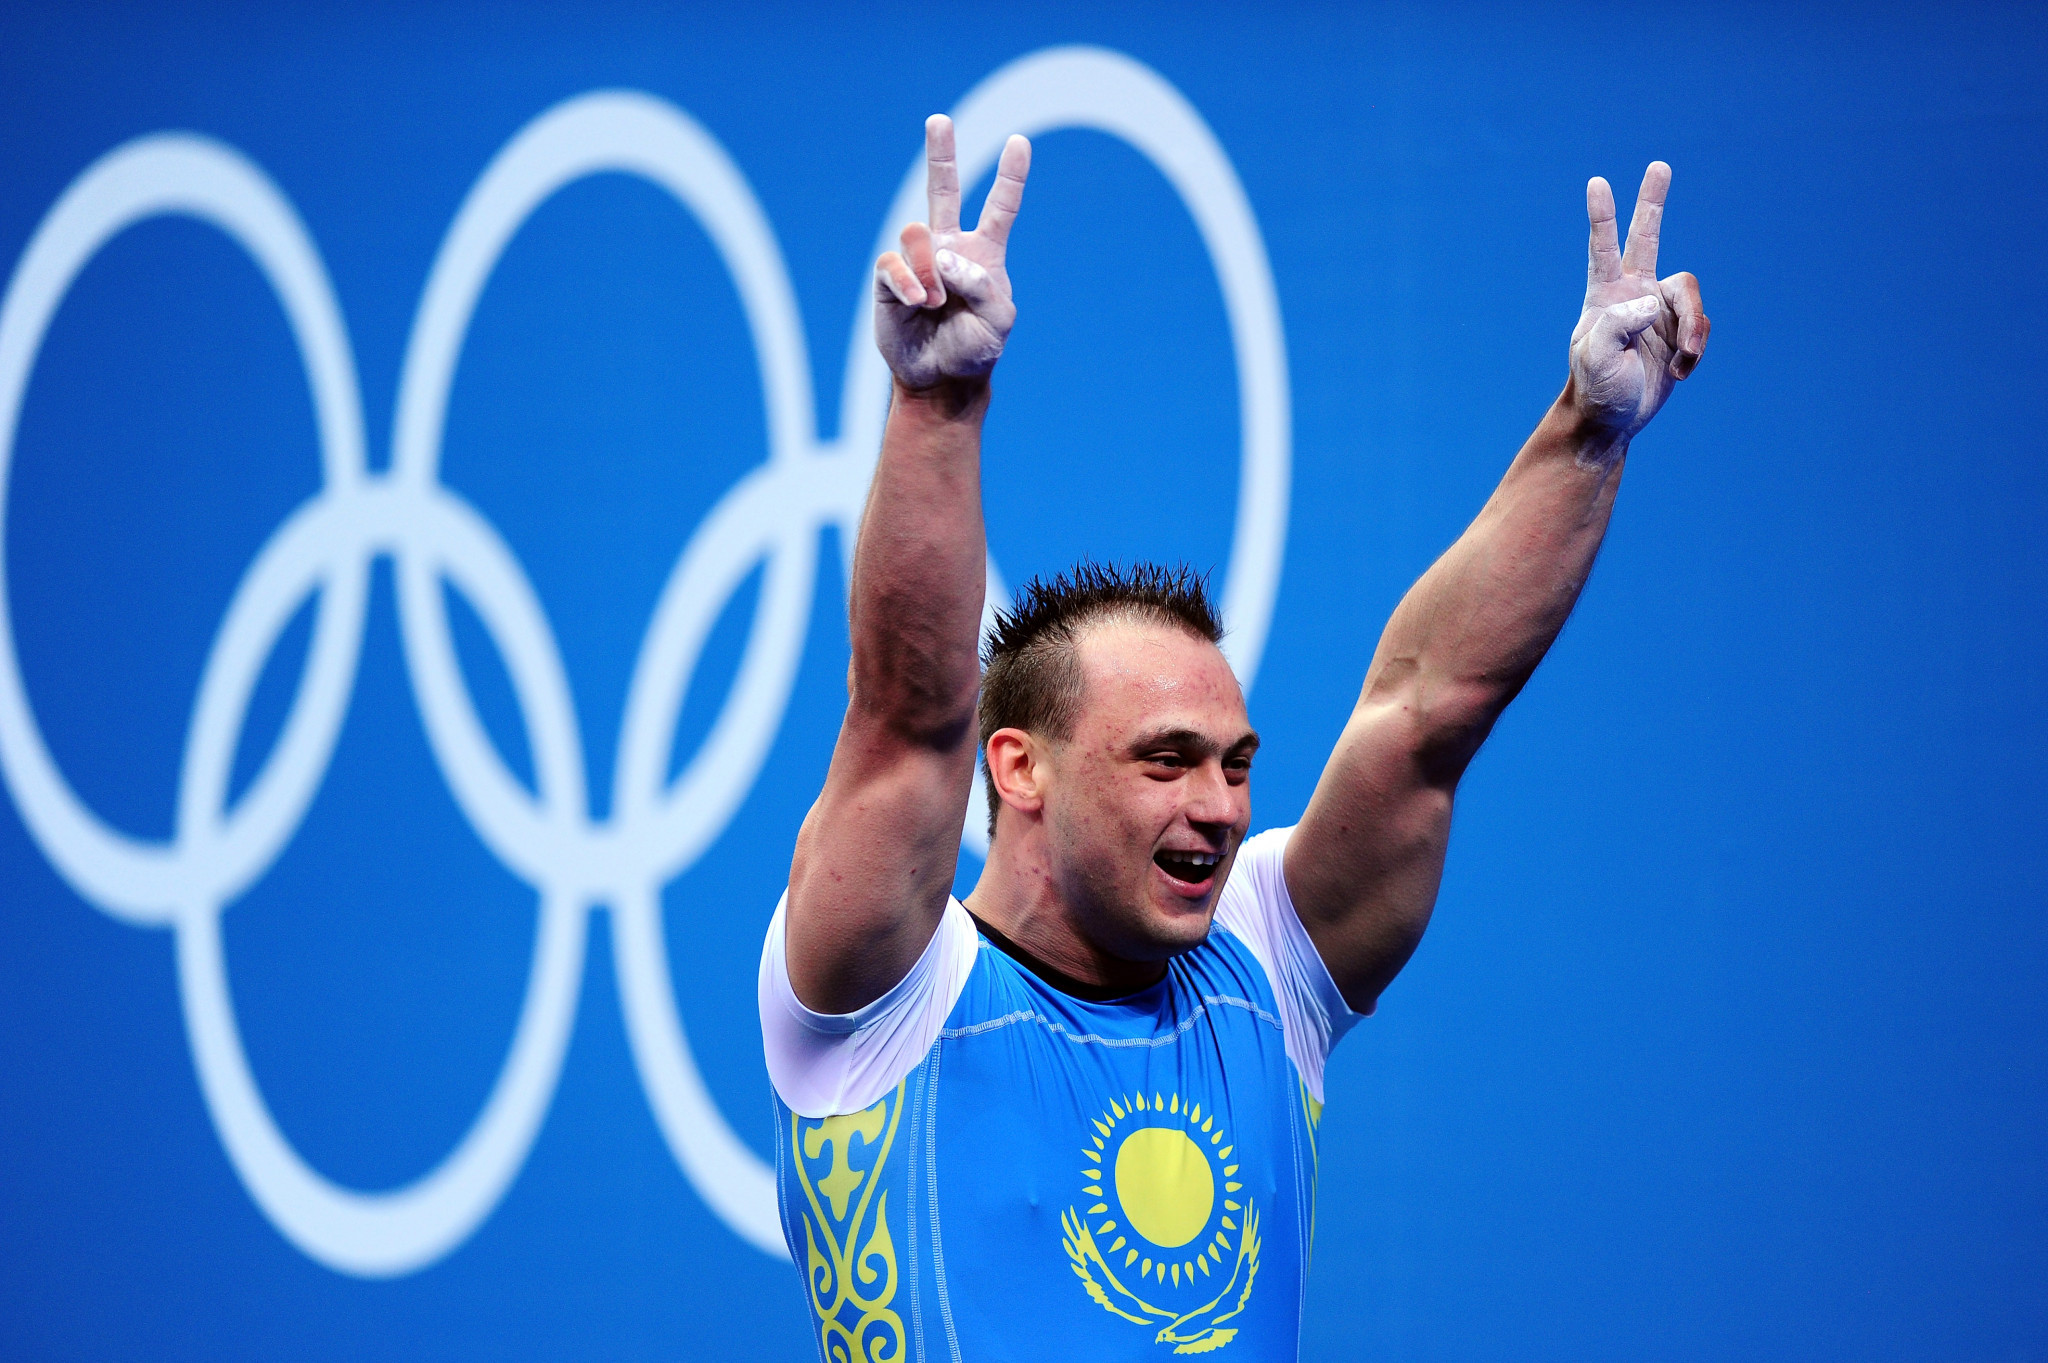 IWF say Kazakh weightlifter Ilyin's two doping offences now come under one violation